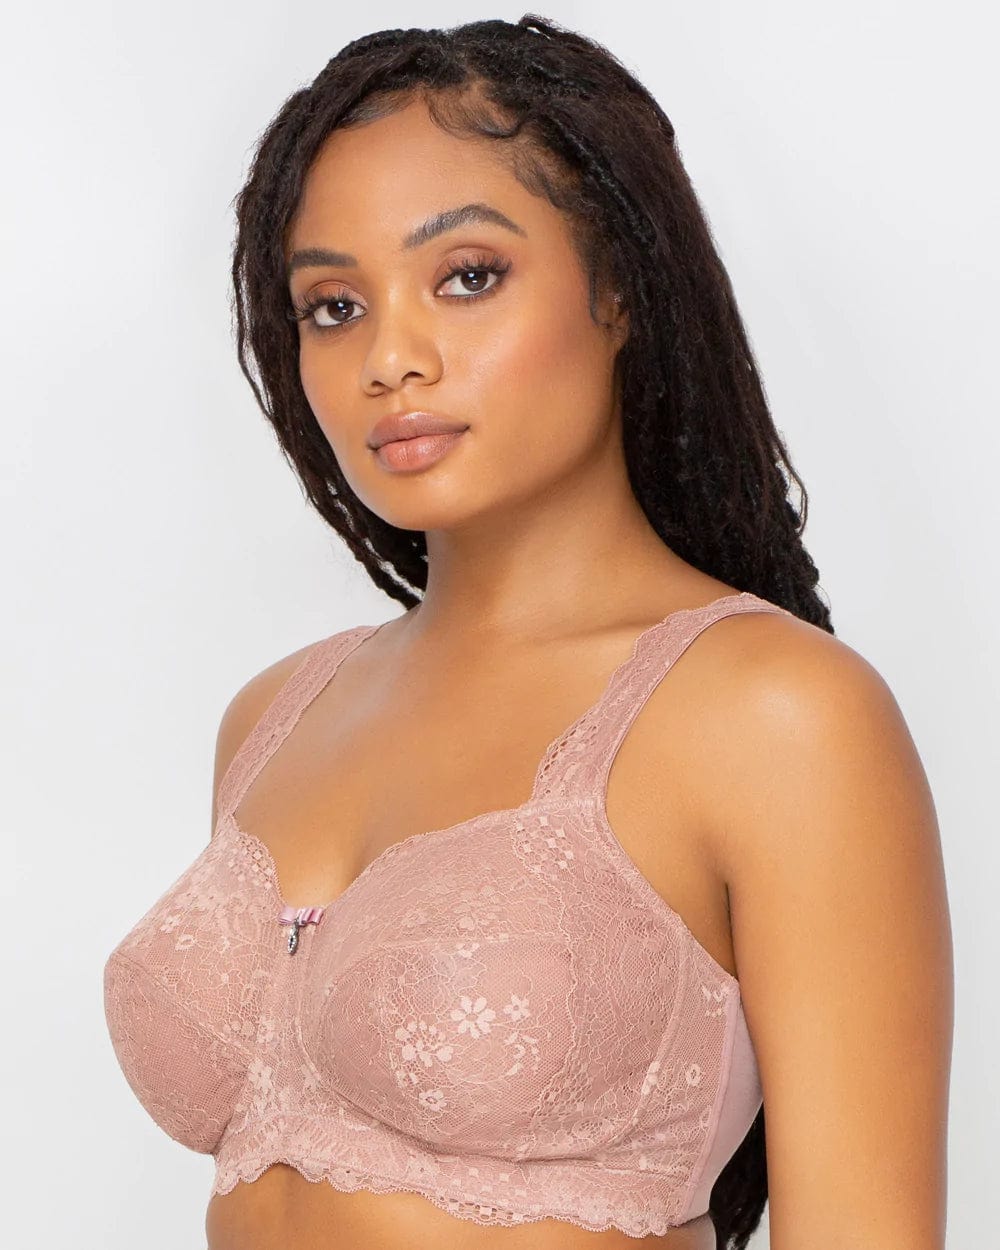 Curvy Couture Bralette Luxe Lace Wireless Bra - Ballet Fever